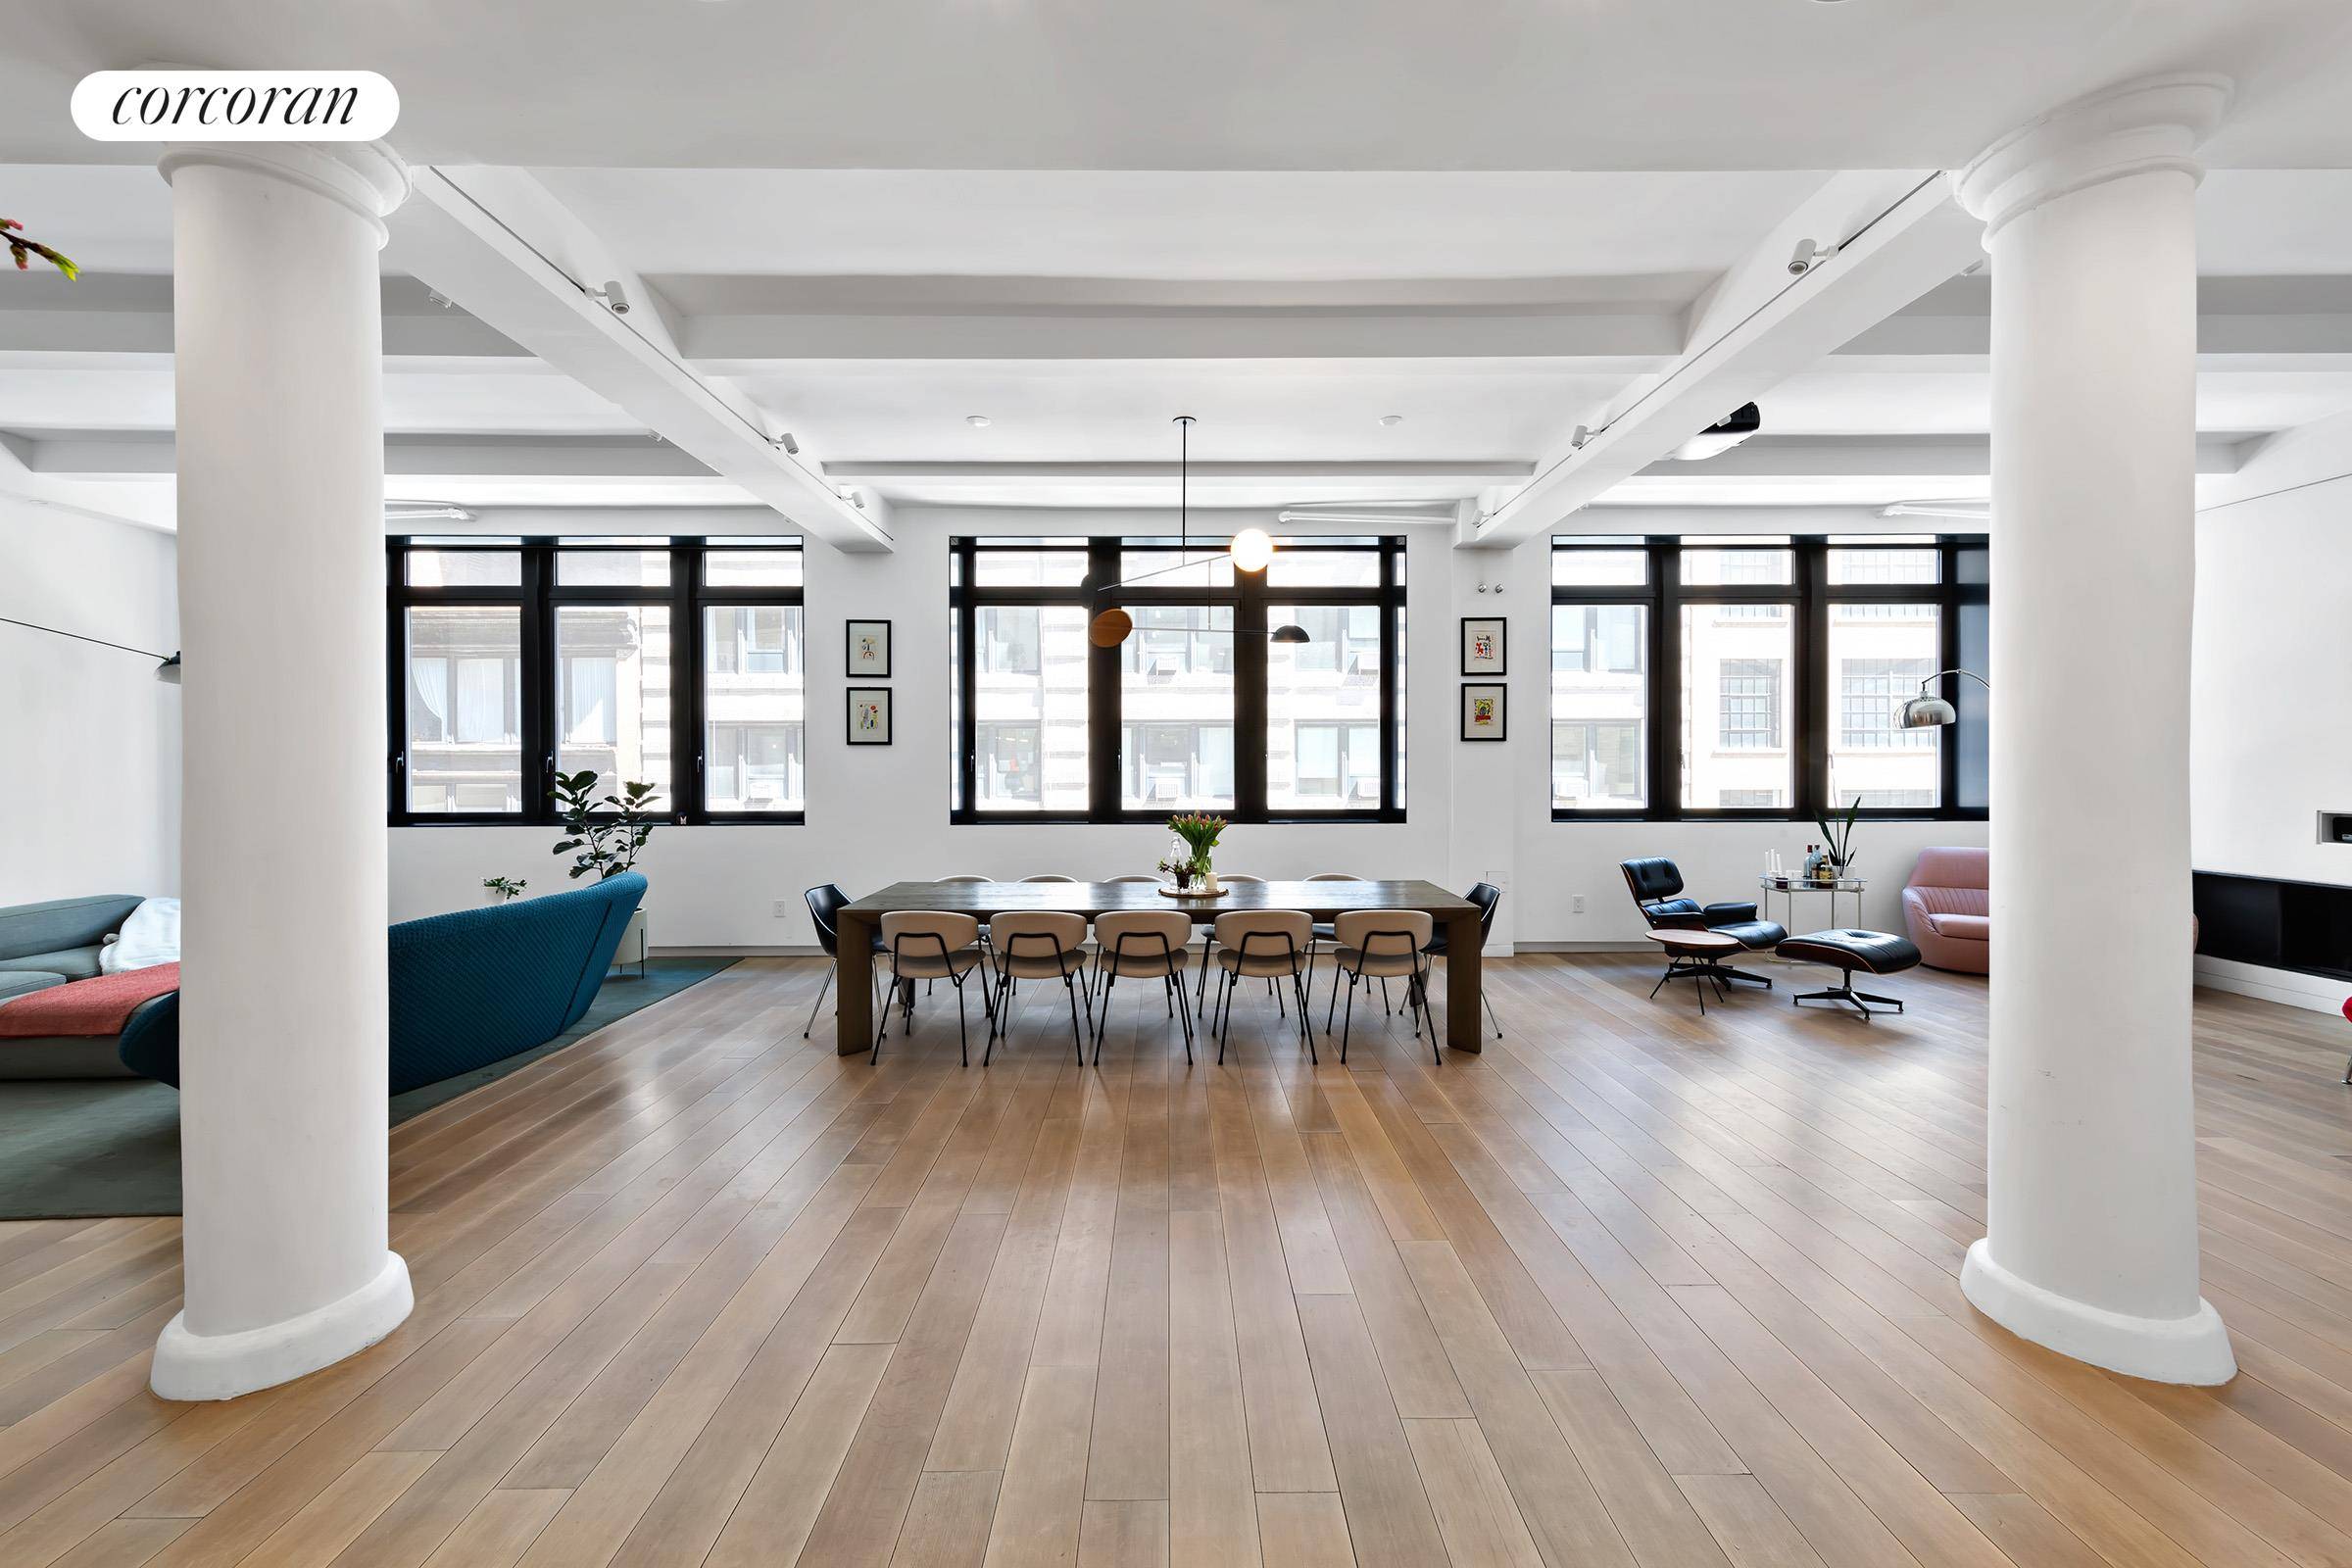 Newly gut renovated by a renowned architecture design firm for the most discerning tenant, Residence 4 at 32 West 20th Street provides an ideal floorplan for today's lifestyle, perfectly positioned ...